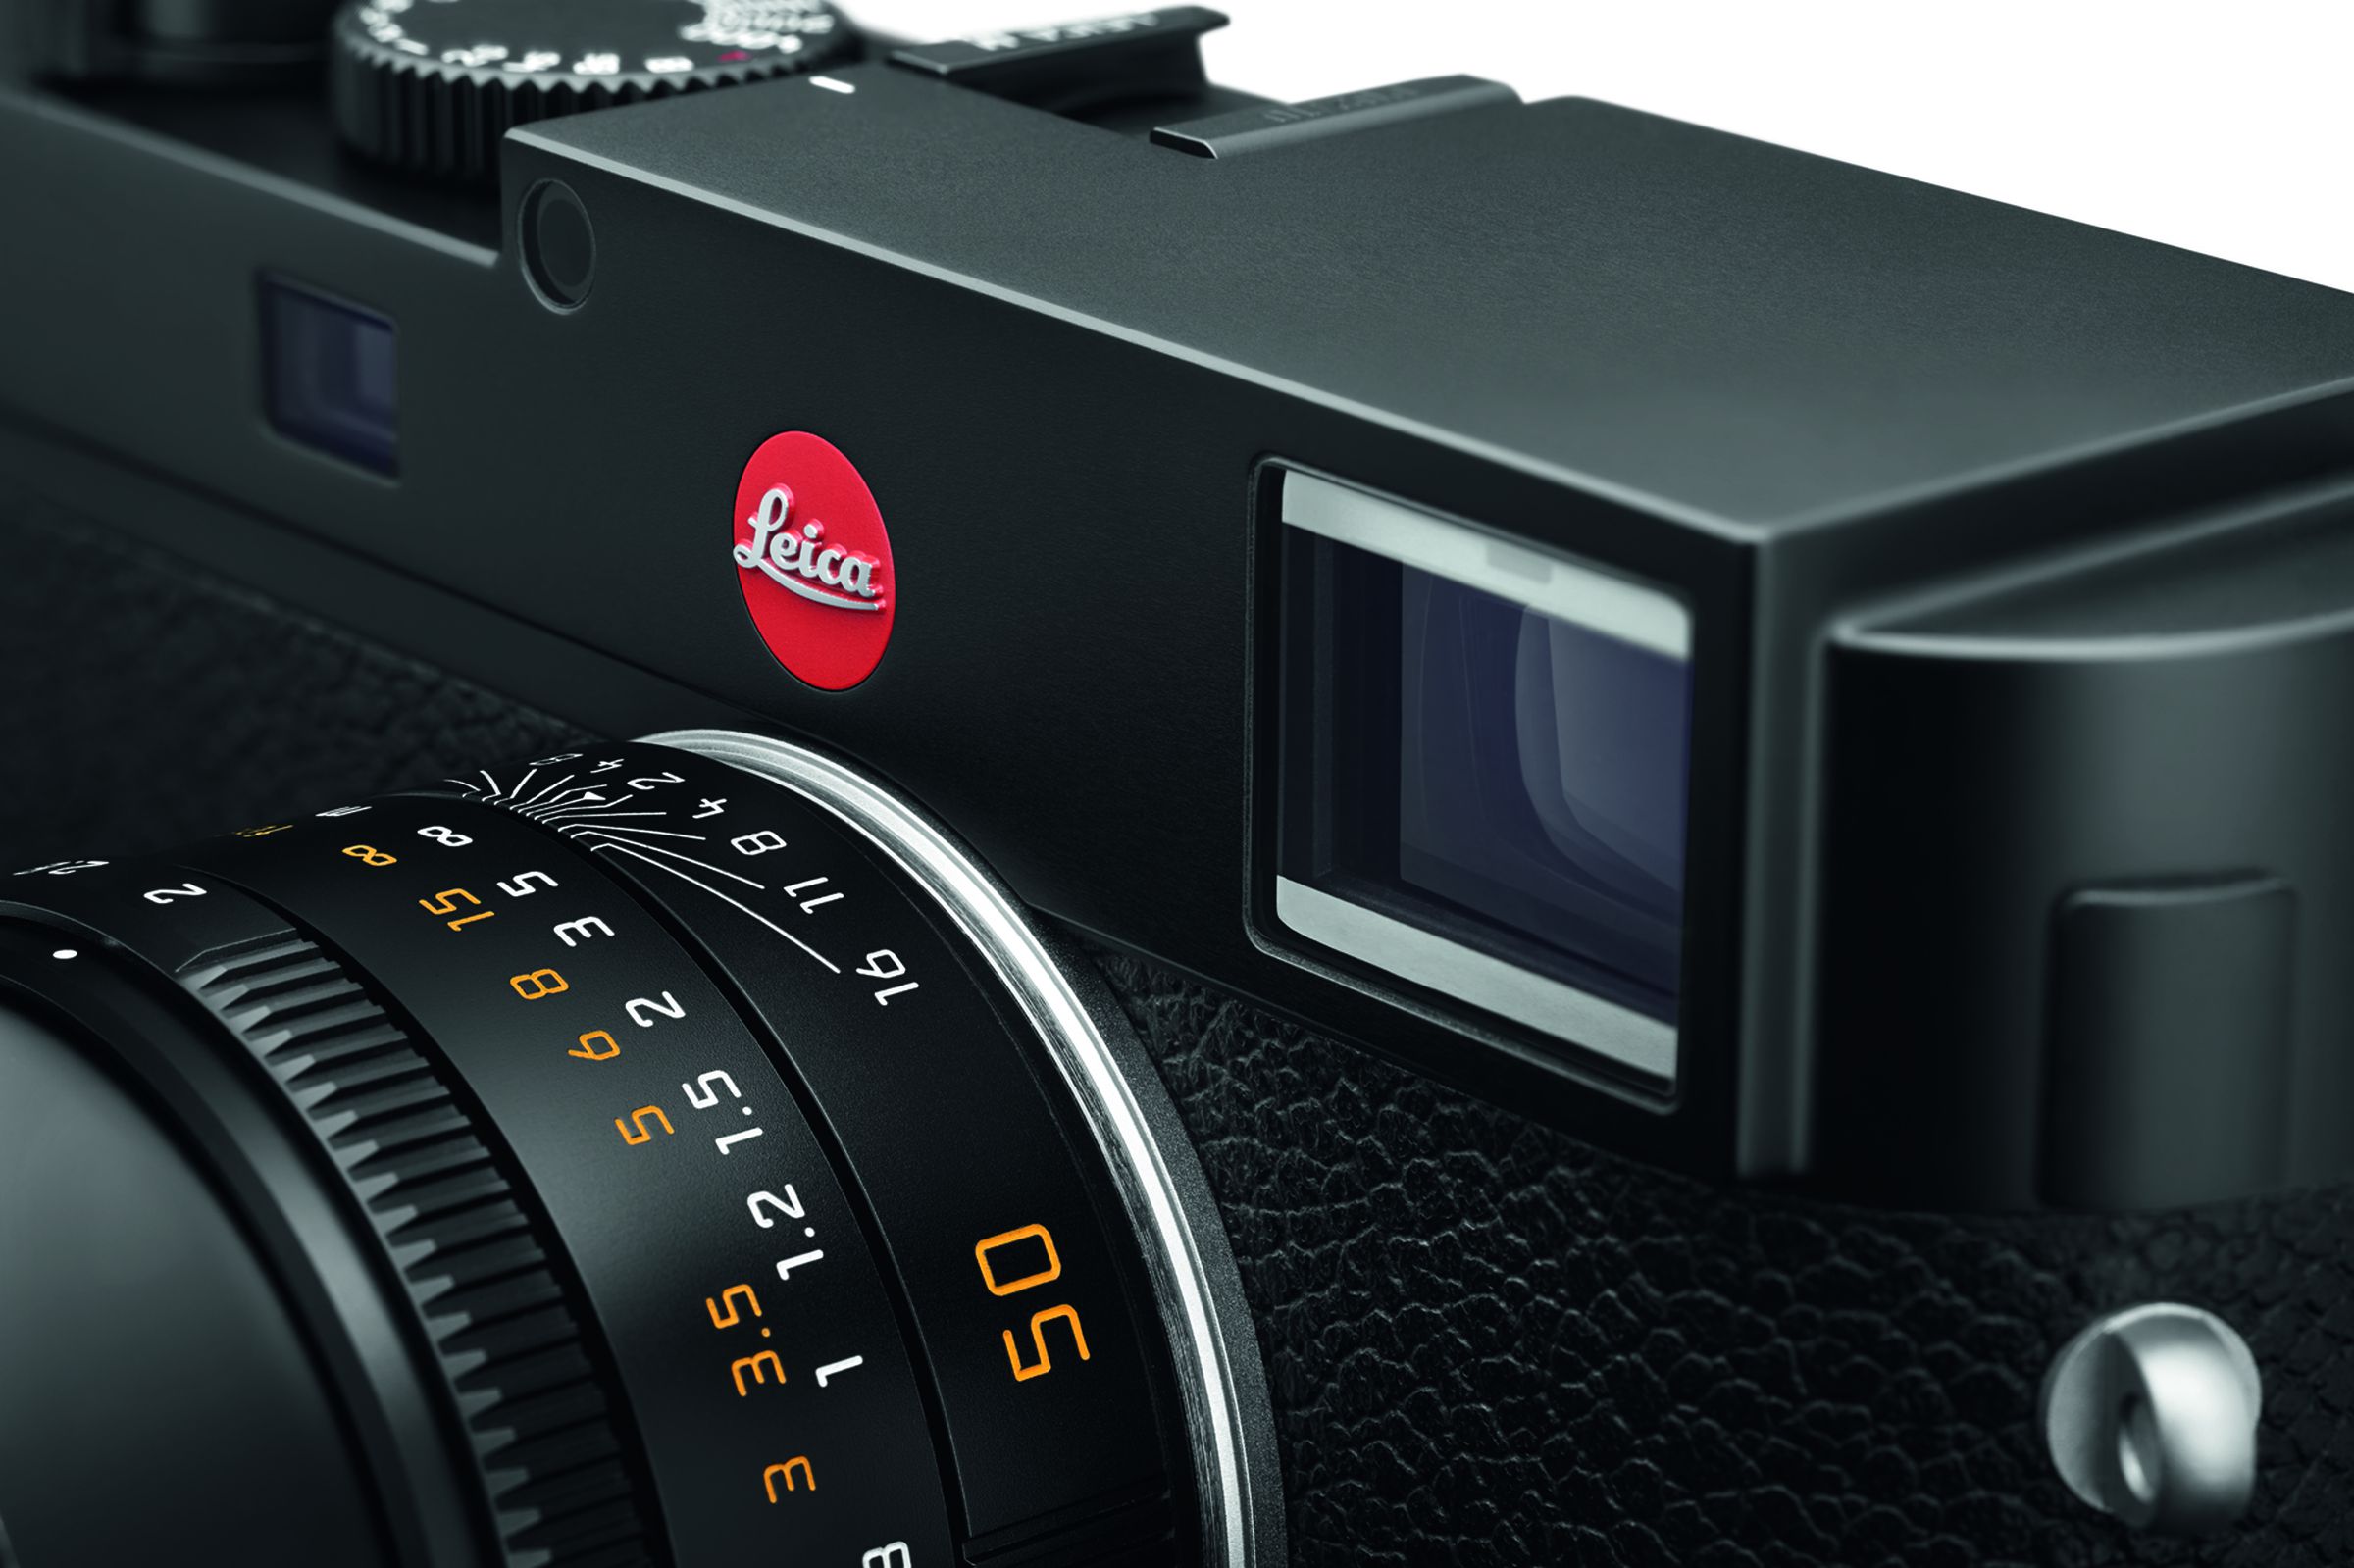 Leica M (Typ 262) images